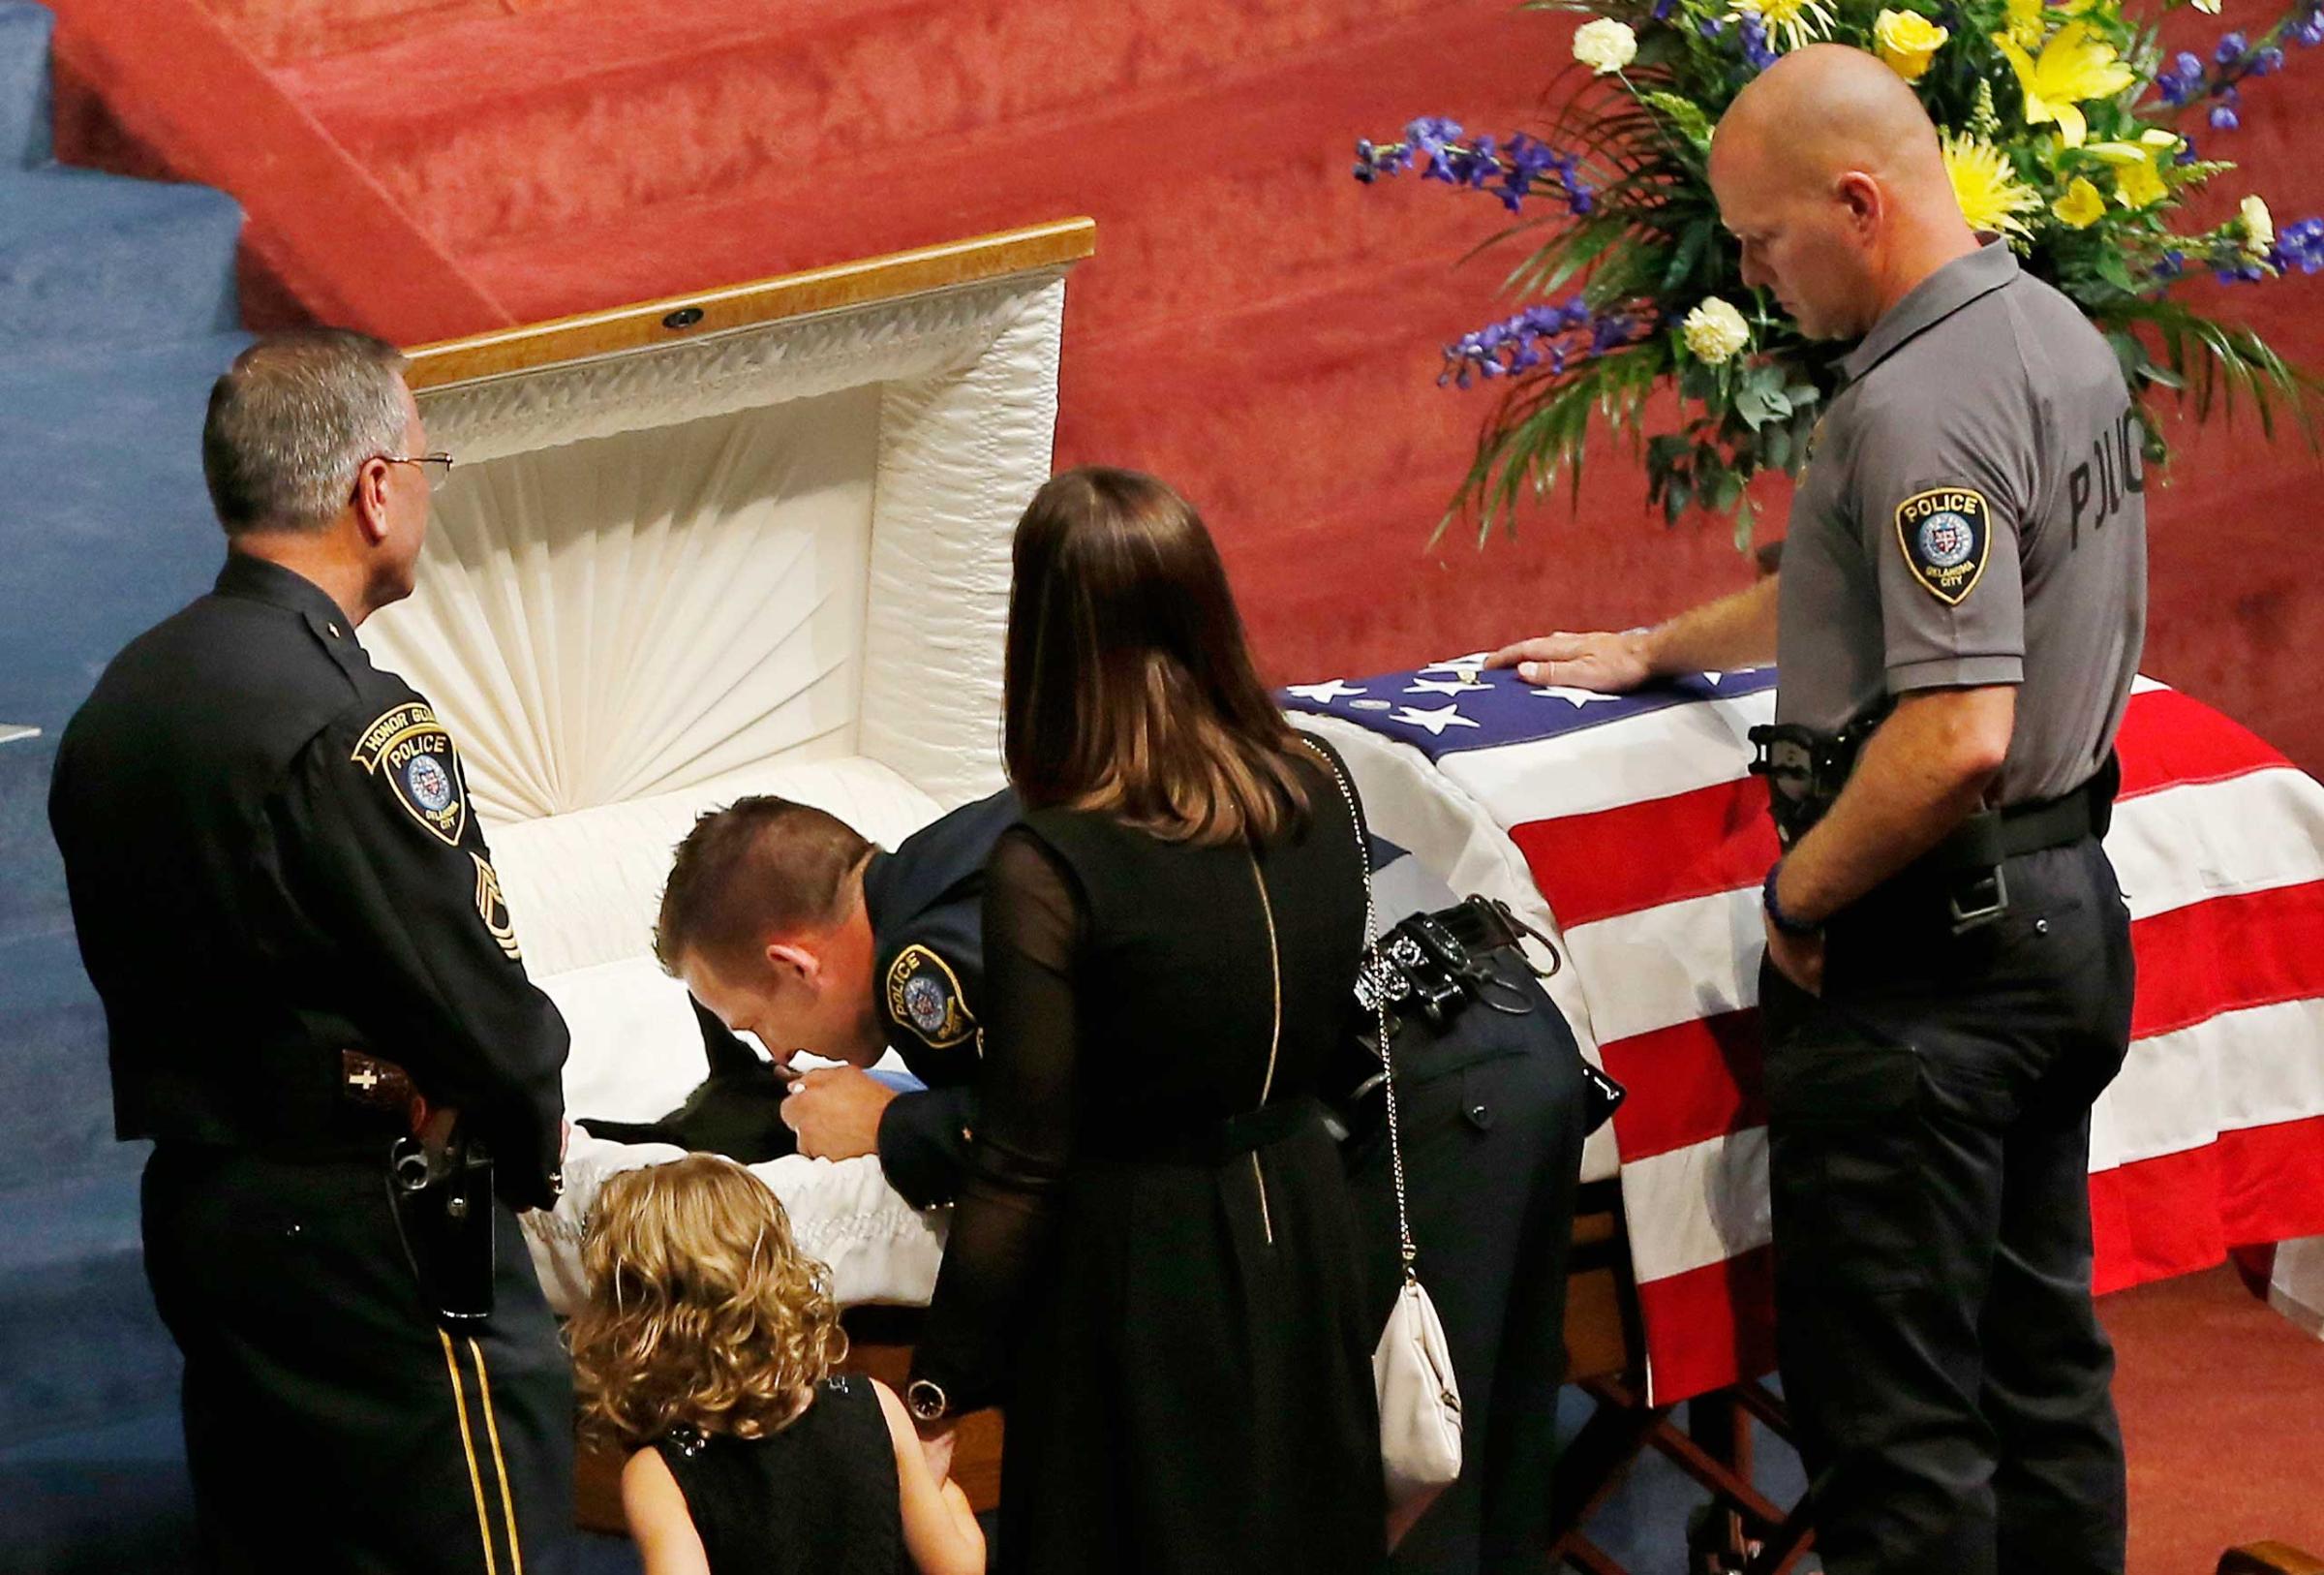 Oklahoma City police officer Sgt. Ryan Stark leans over the casket of his canine partner, K-9 Kye, following funeral services for the dog in Oklahoma City, Aug. 28, 2014.